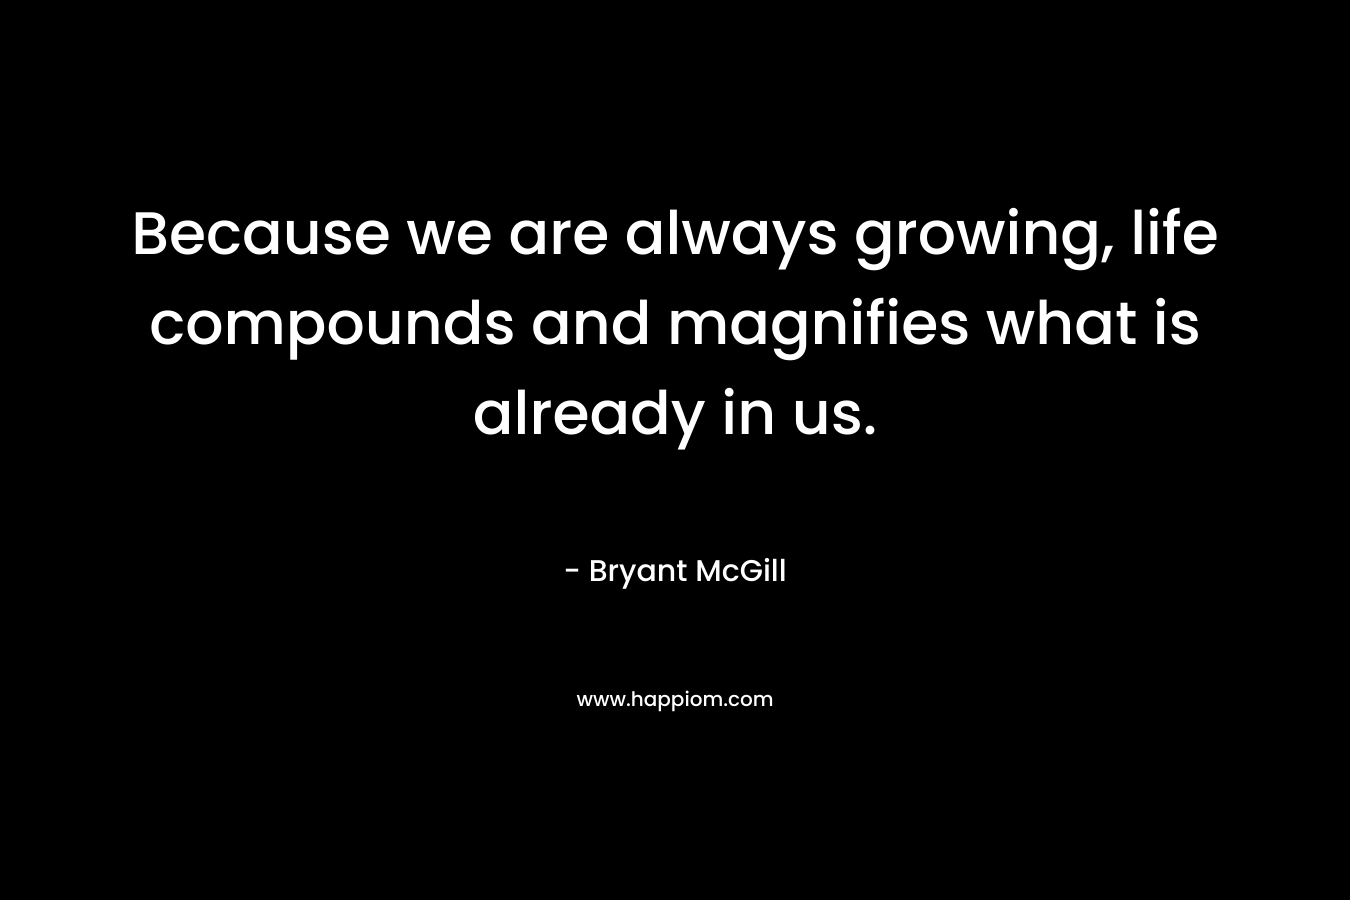 Because we are always growing, life compounds and magnifies what is already in us.